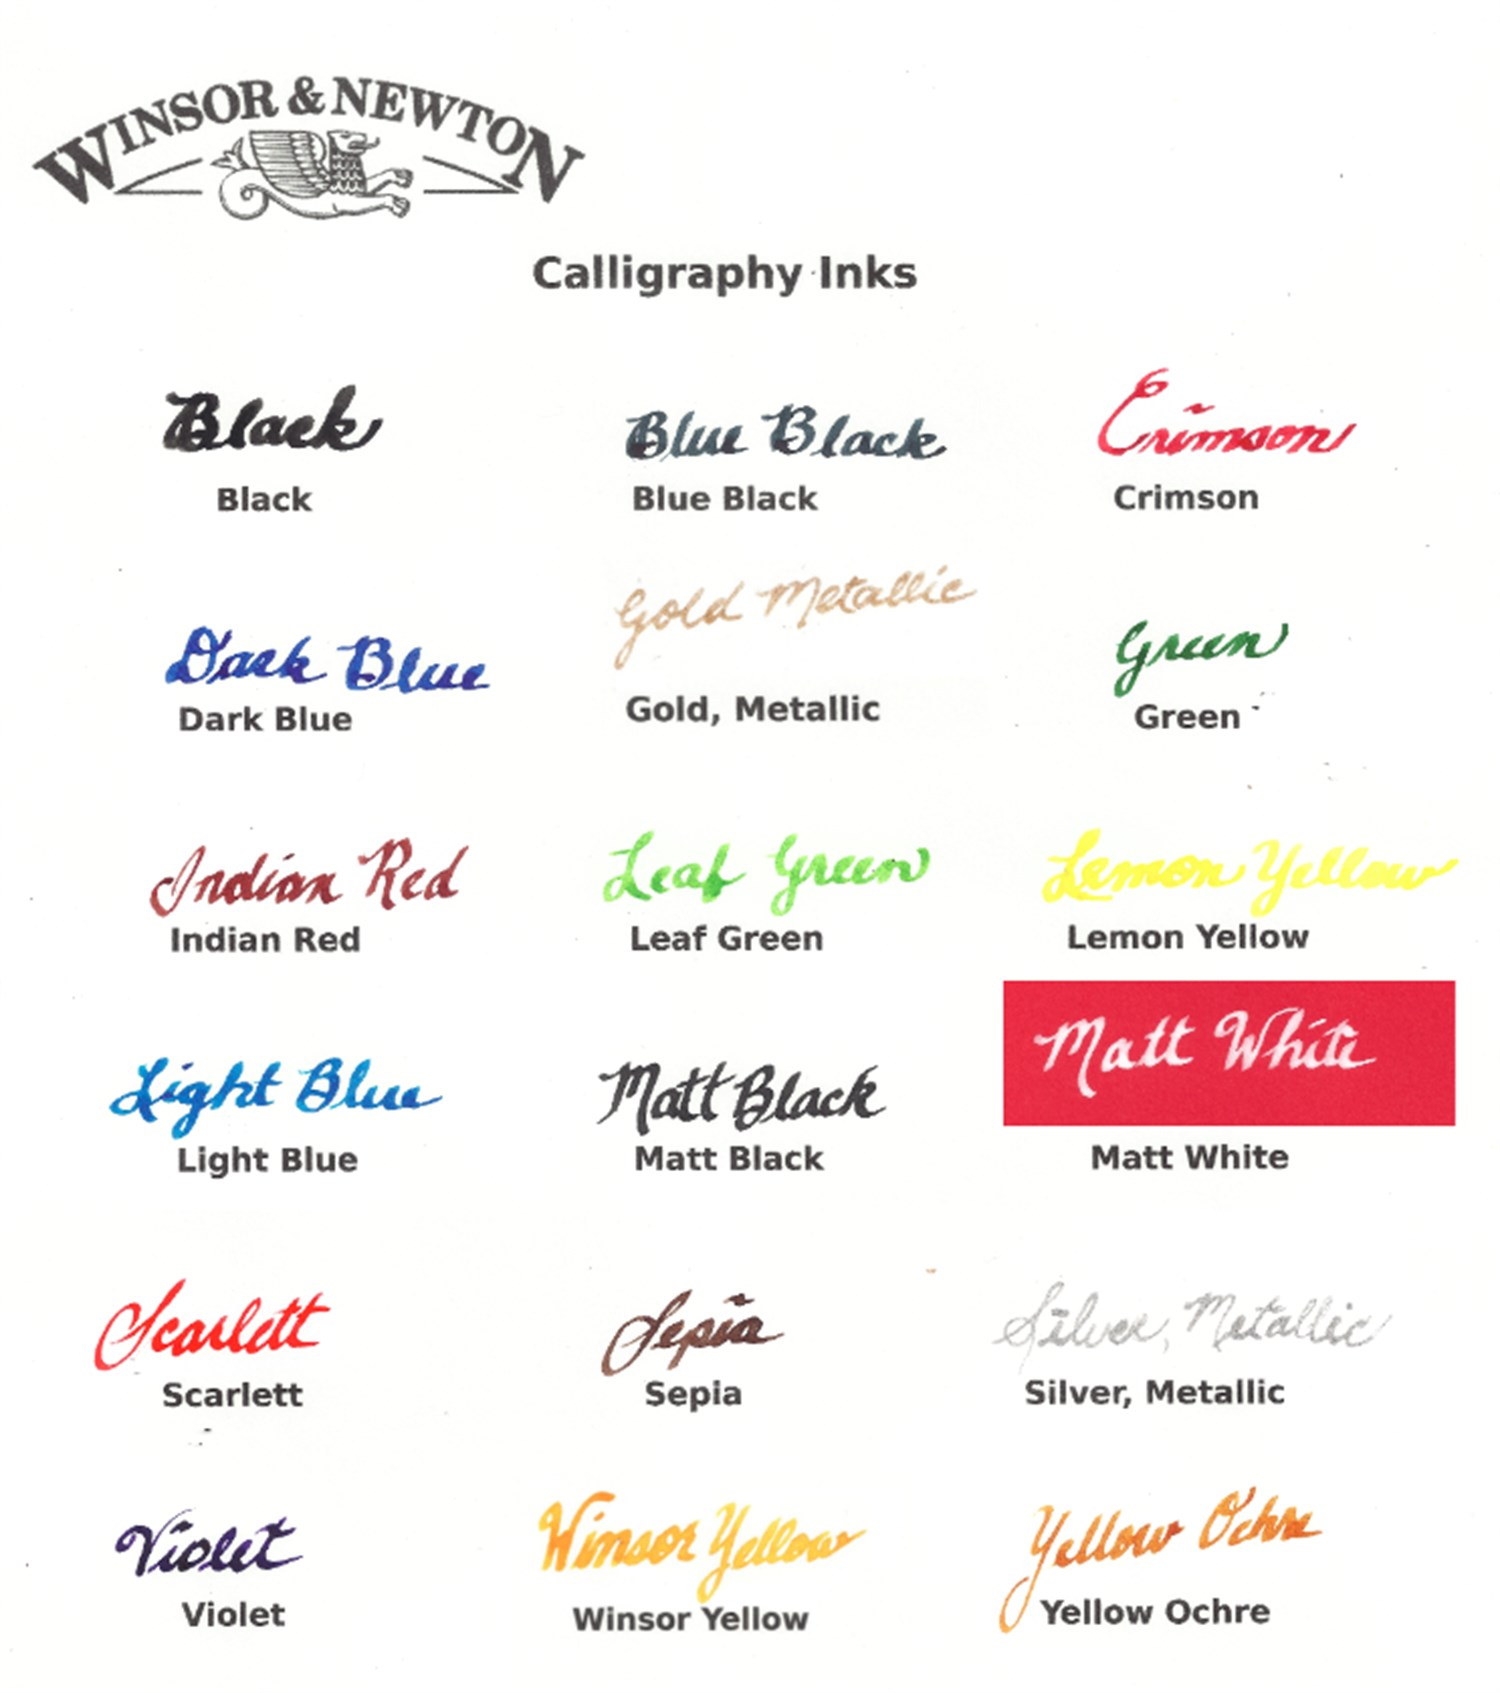 Winsor & Newton Calligraphy Ink 30 ml , 9 colors – Rung